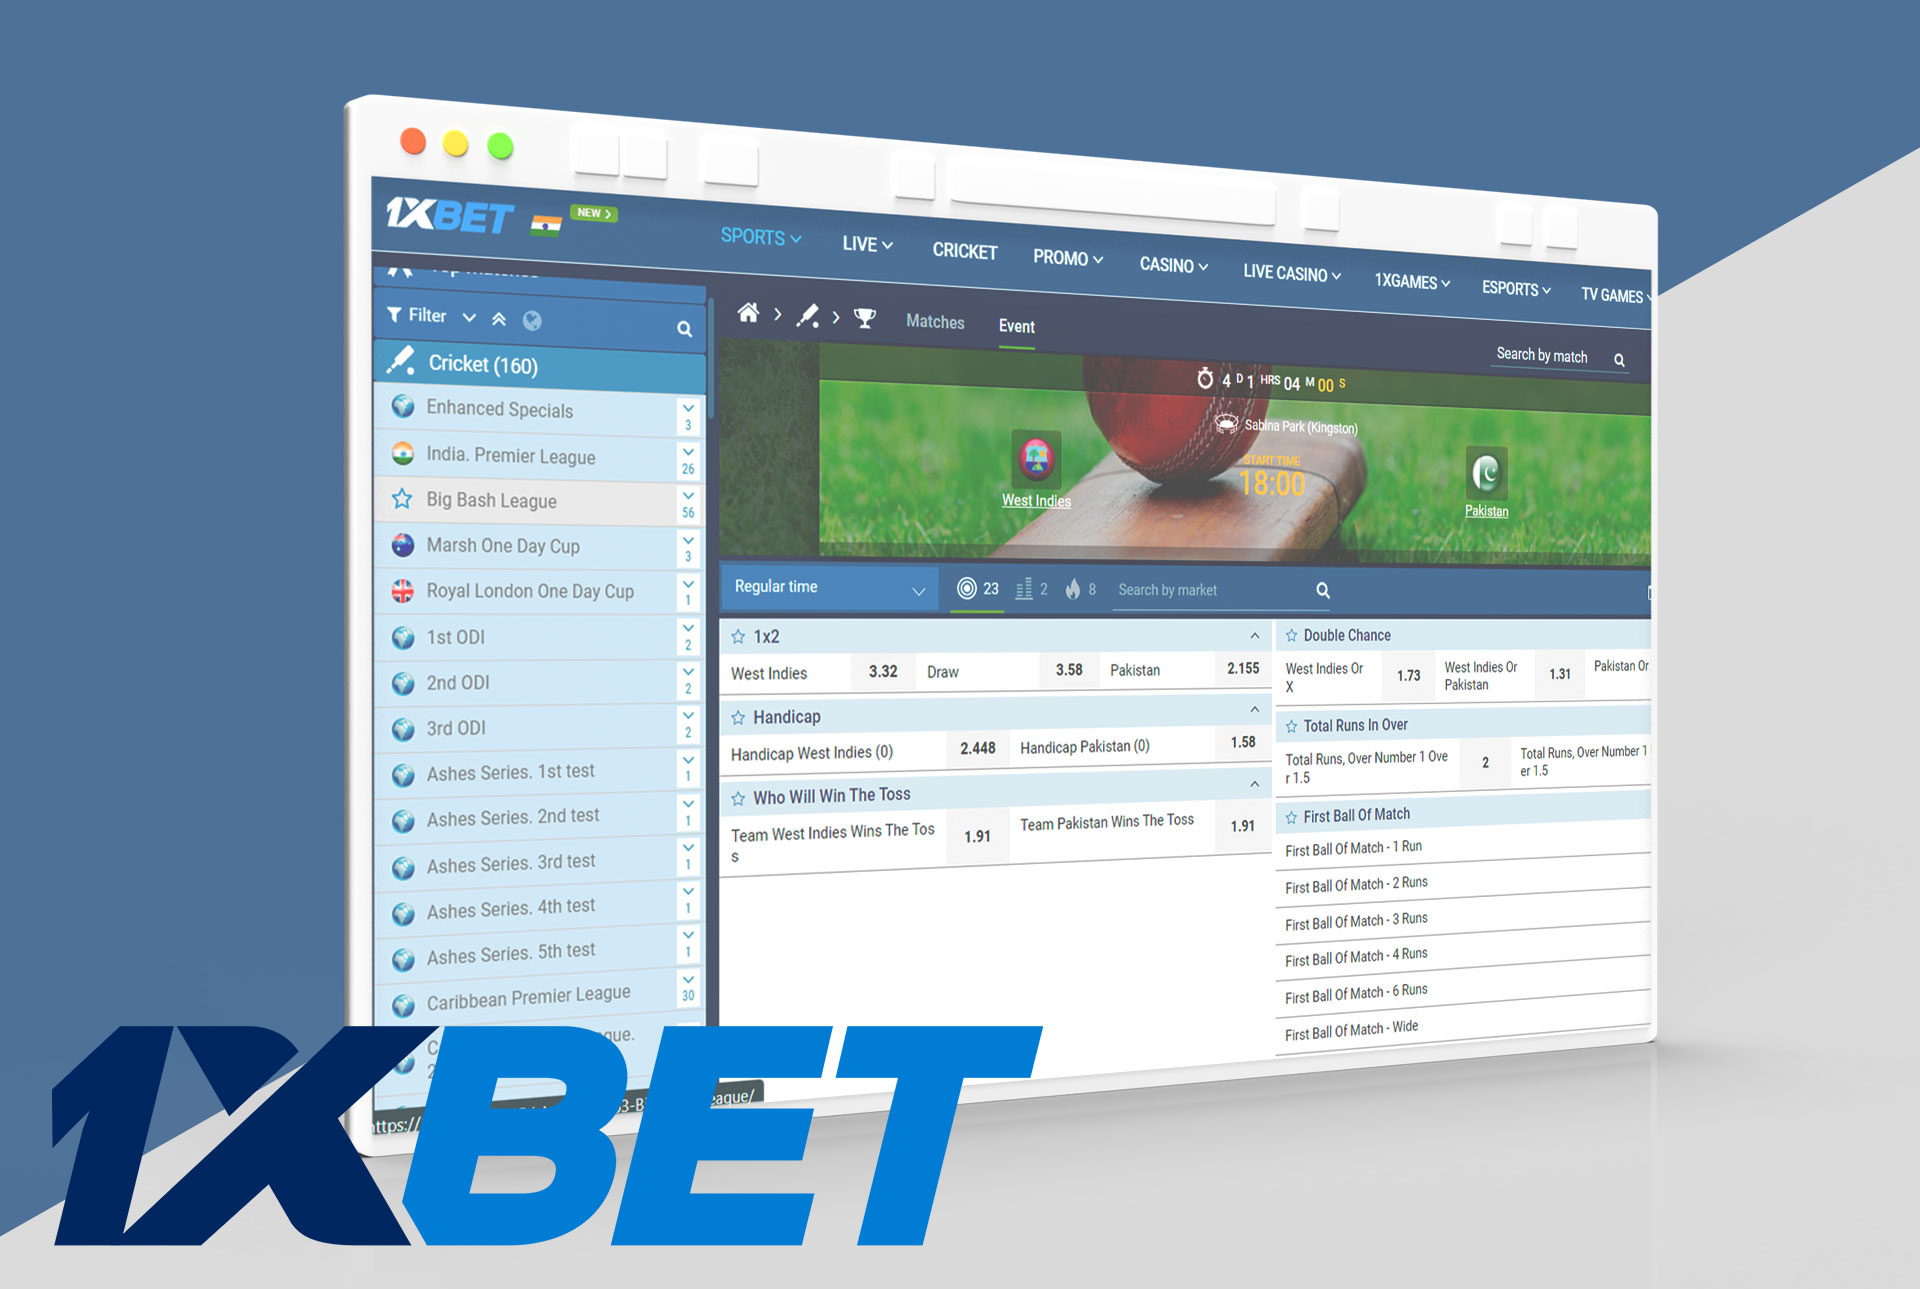 In this article you will get ti know, how to place bets on cricket in 1xbet.